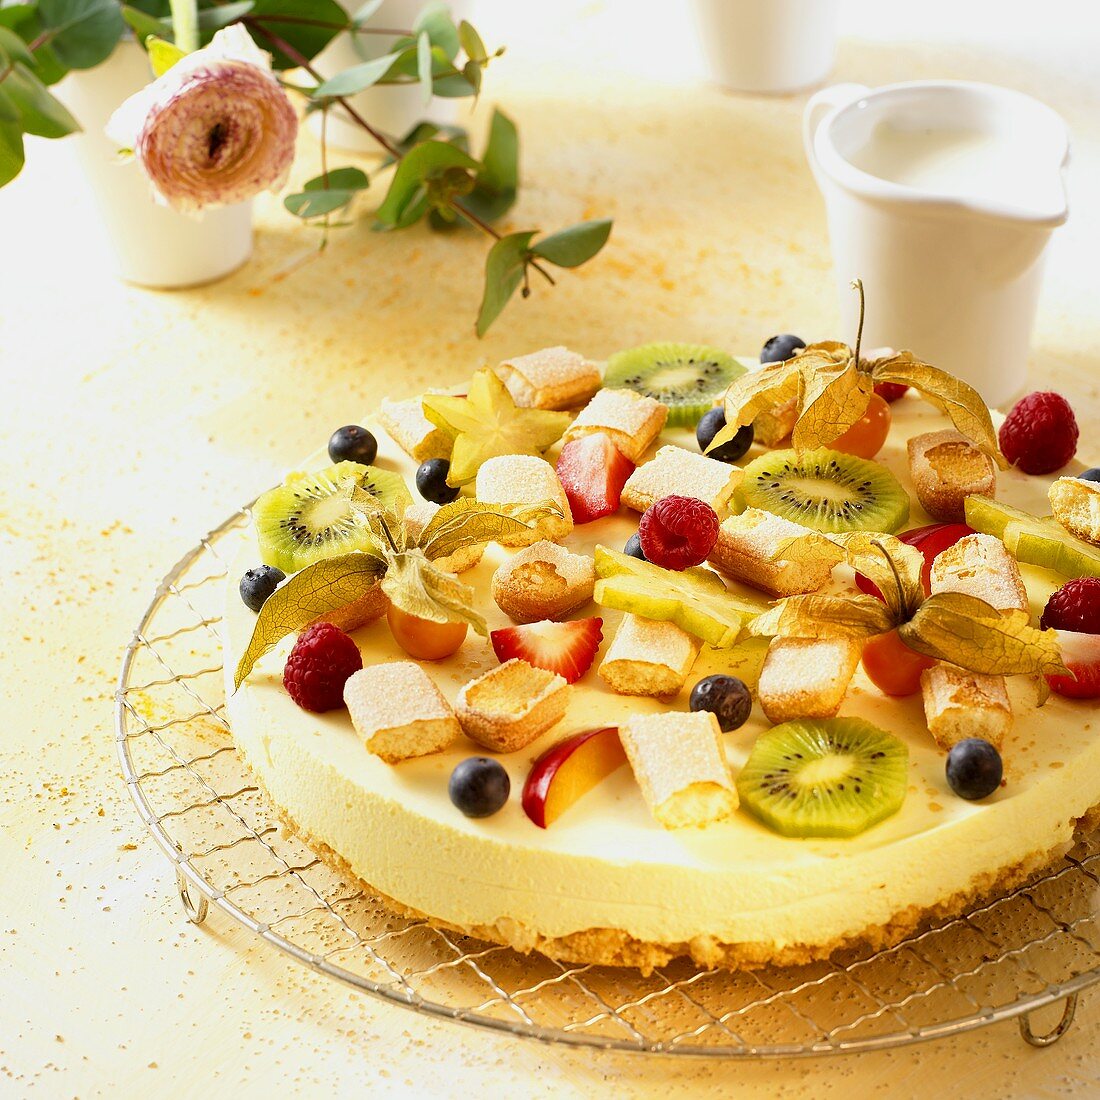 Cheesecake with fruit and sponge fingers